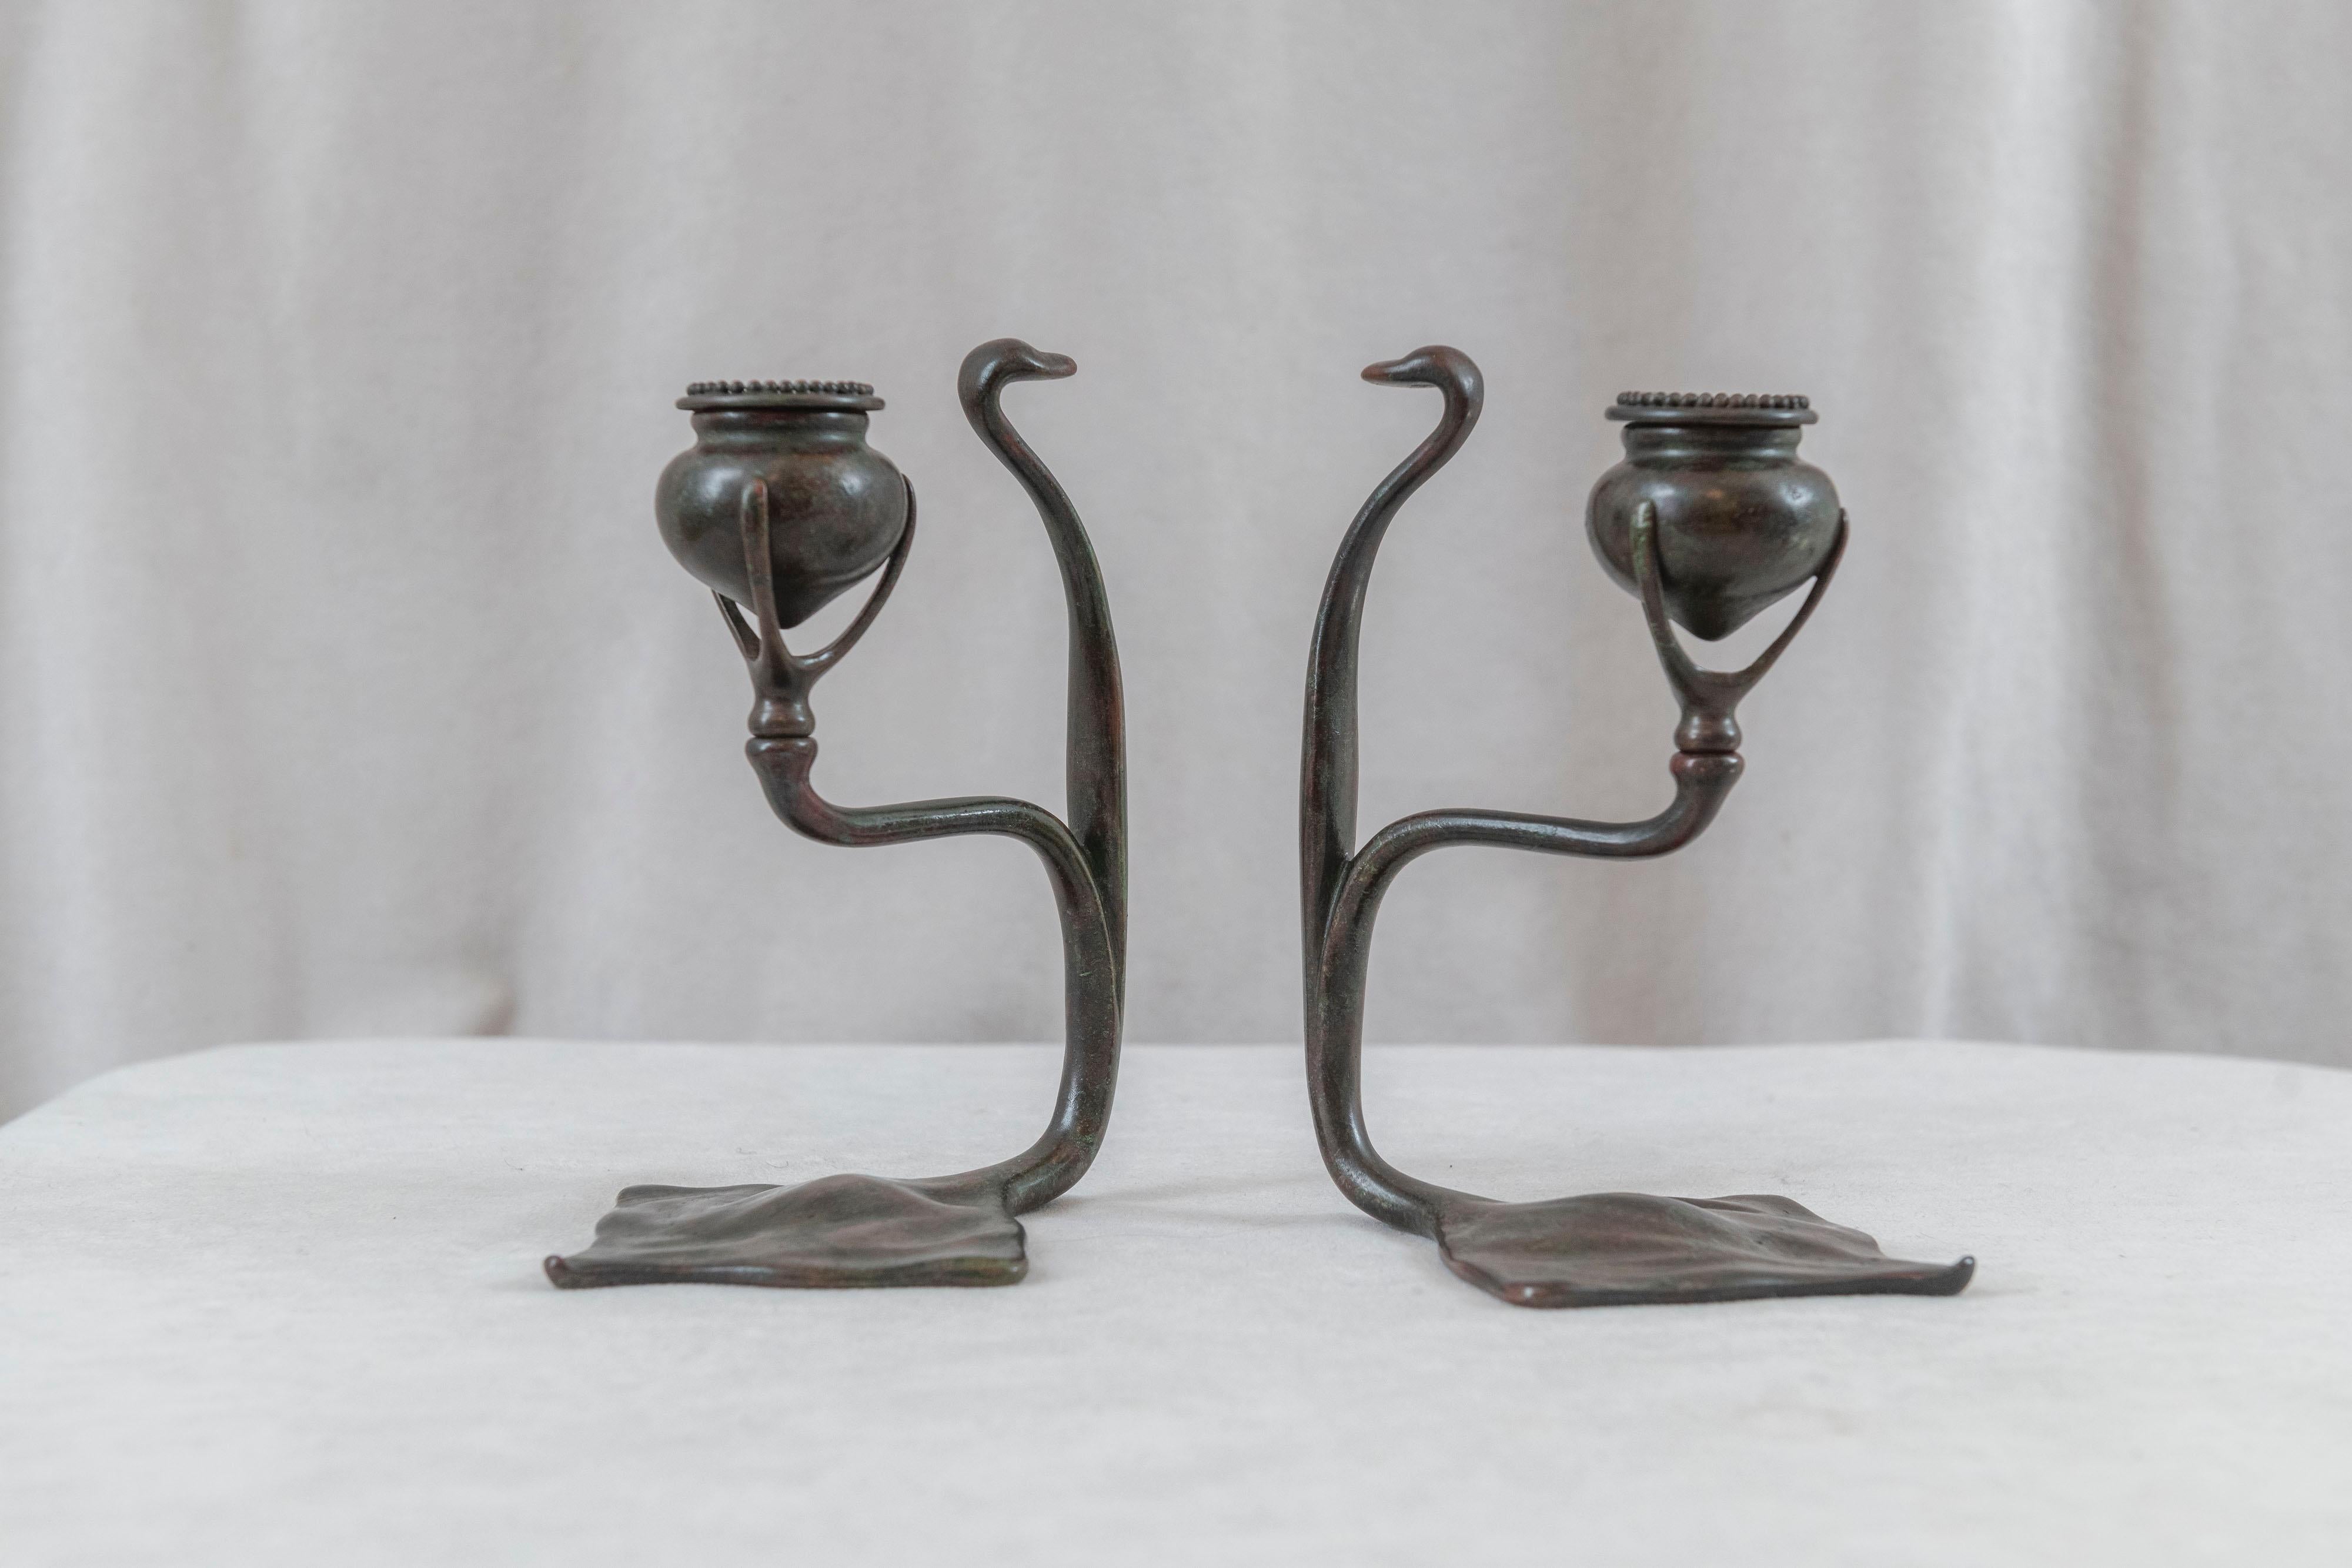  If you are looking for a pair of Tiffany candlesticks these are hard to beat. Beautifully cast and richly patinated with reddish brown with green highlights that Tiffany was known for. The graceful design has the look of a cobra, hence the